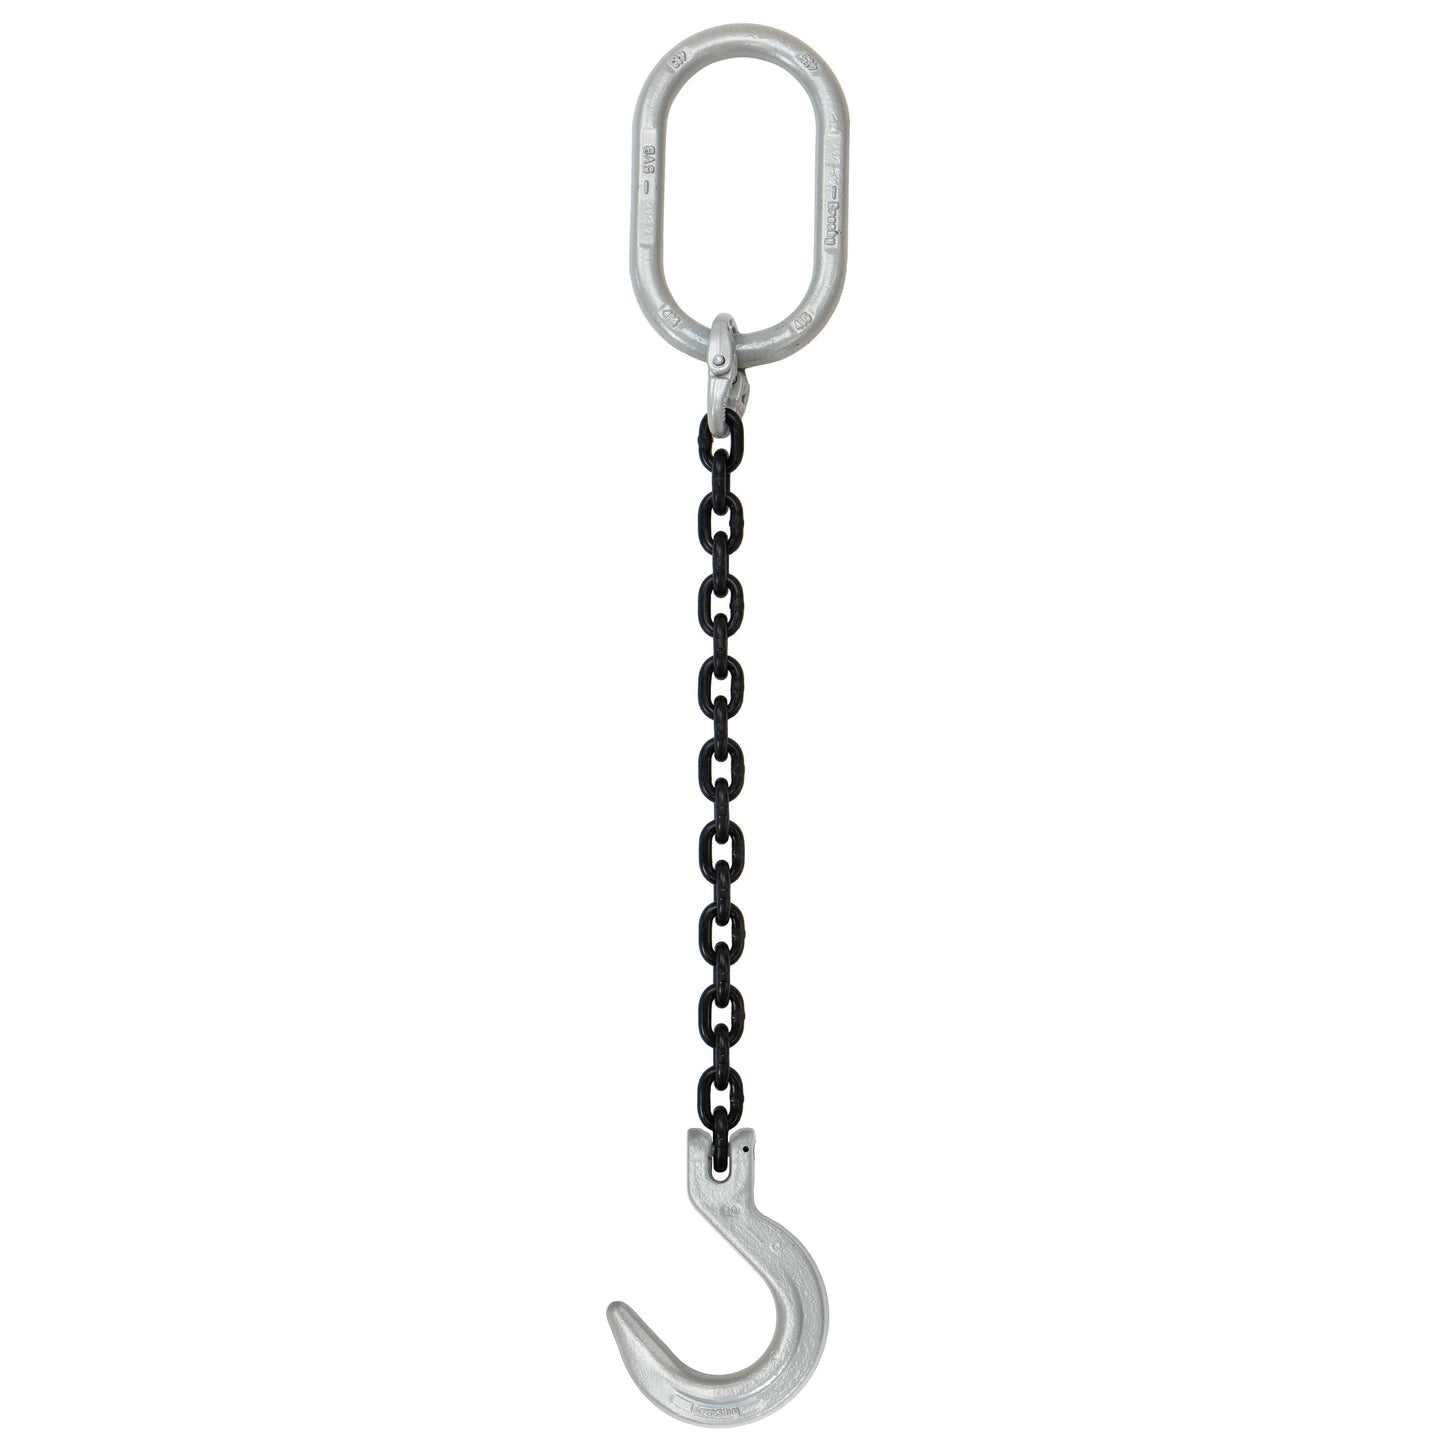 12 inch x 16 foot Domestic Single Leg Chain Sling w Crosby Foundry Hook Grade 100 image 1 of 2